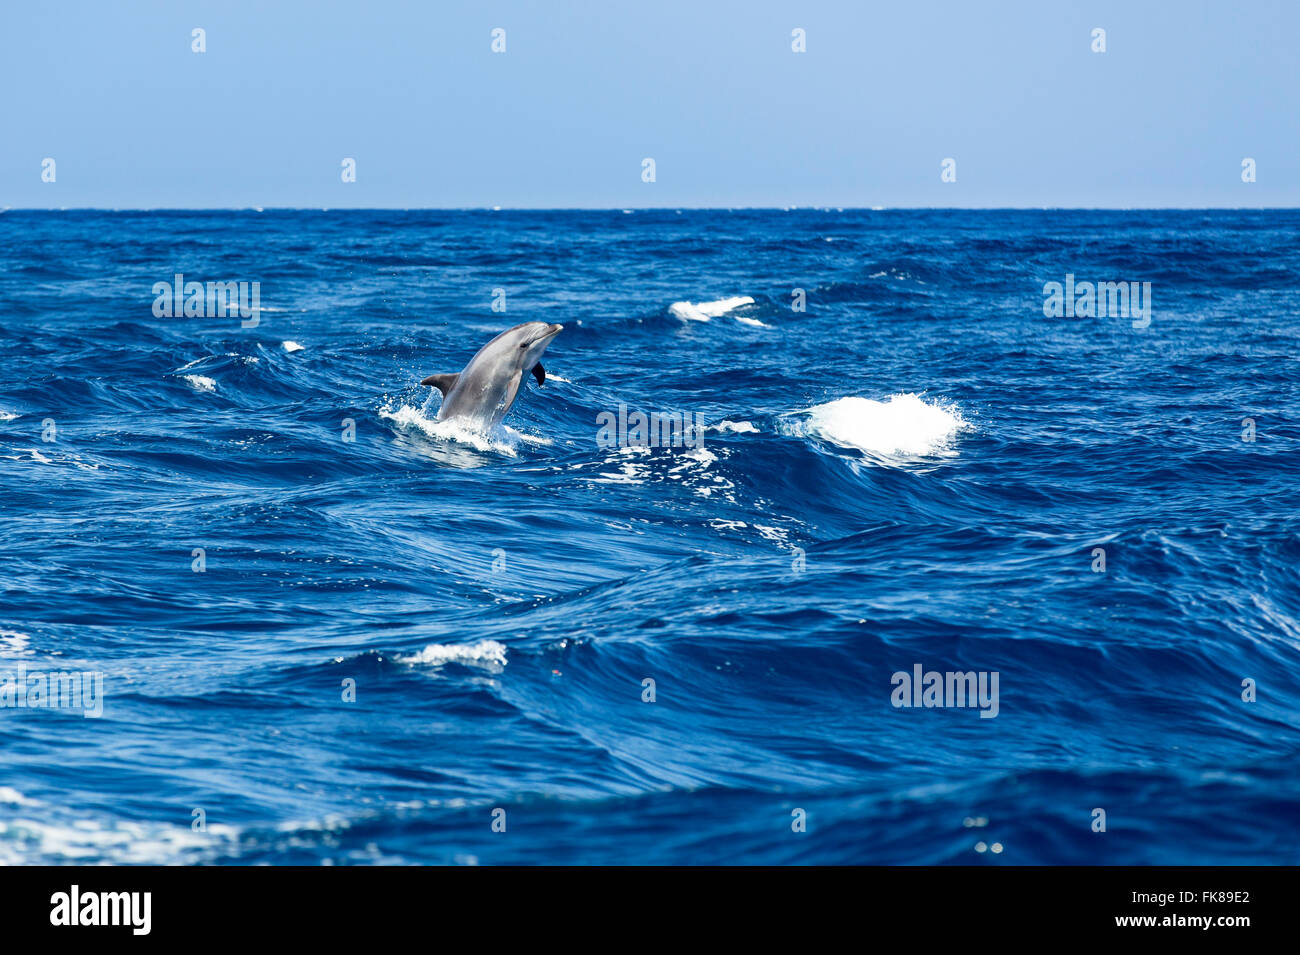 Bottlenose dolphin (Tursiops truncatus) jumping out of the water at Los Gigantes, Atlantic, Tenerife, Canary Islands, Spain Stock Photo